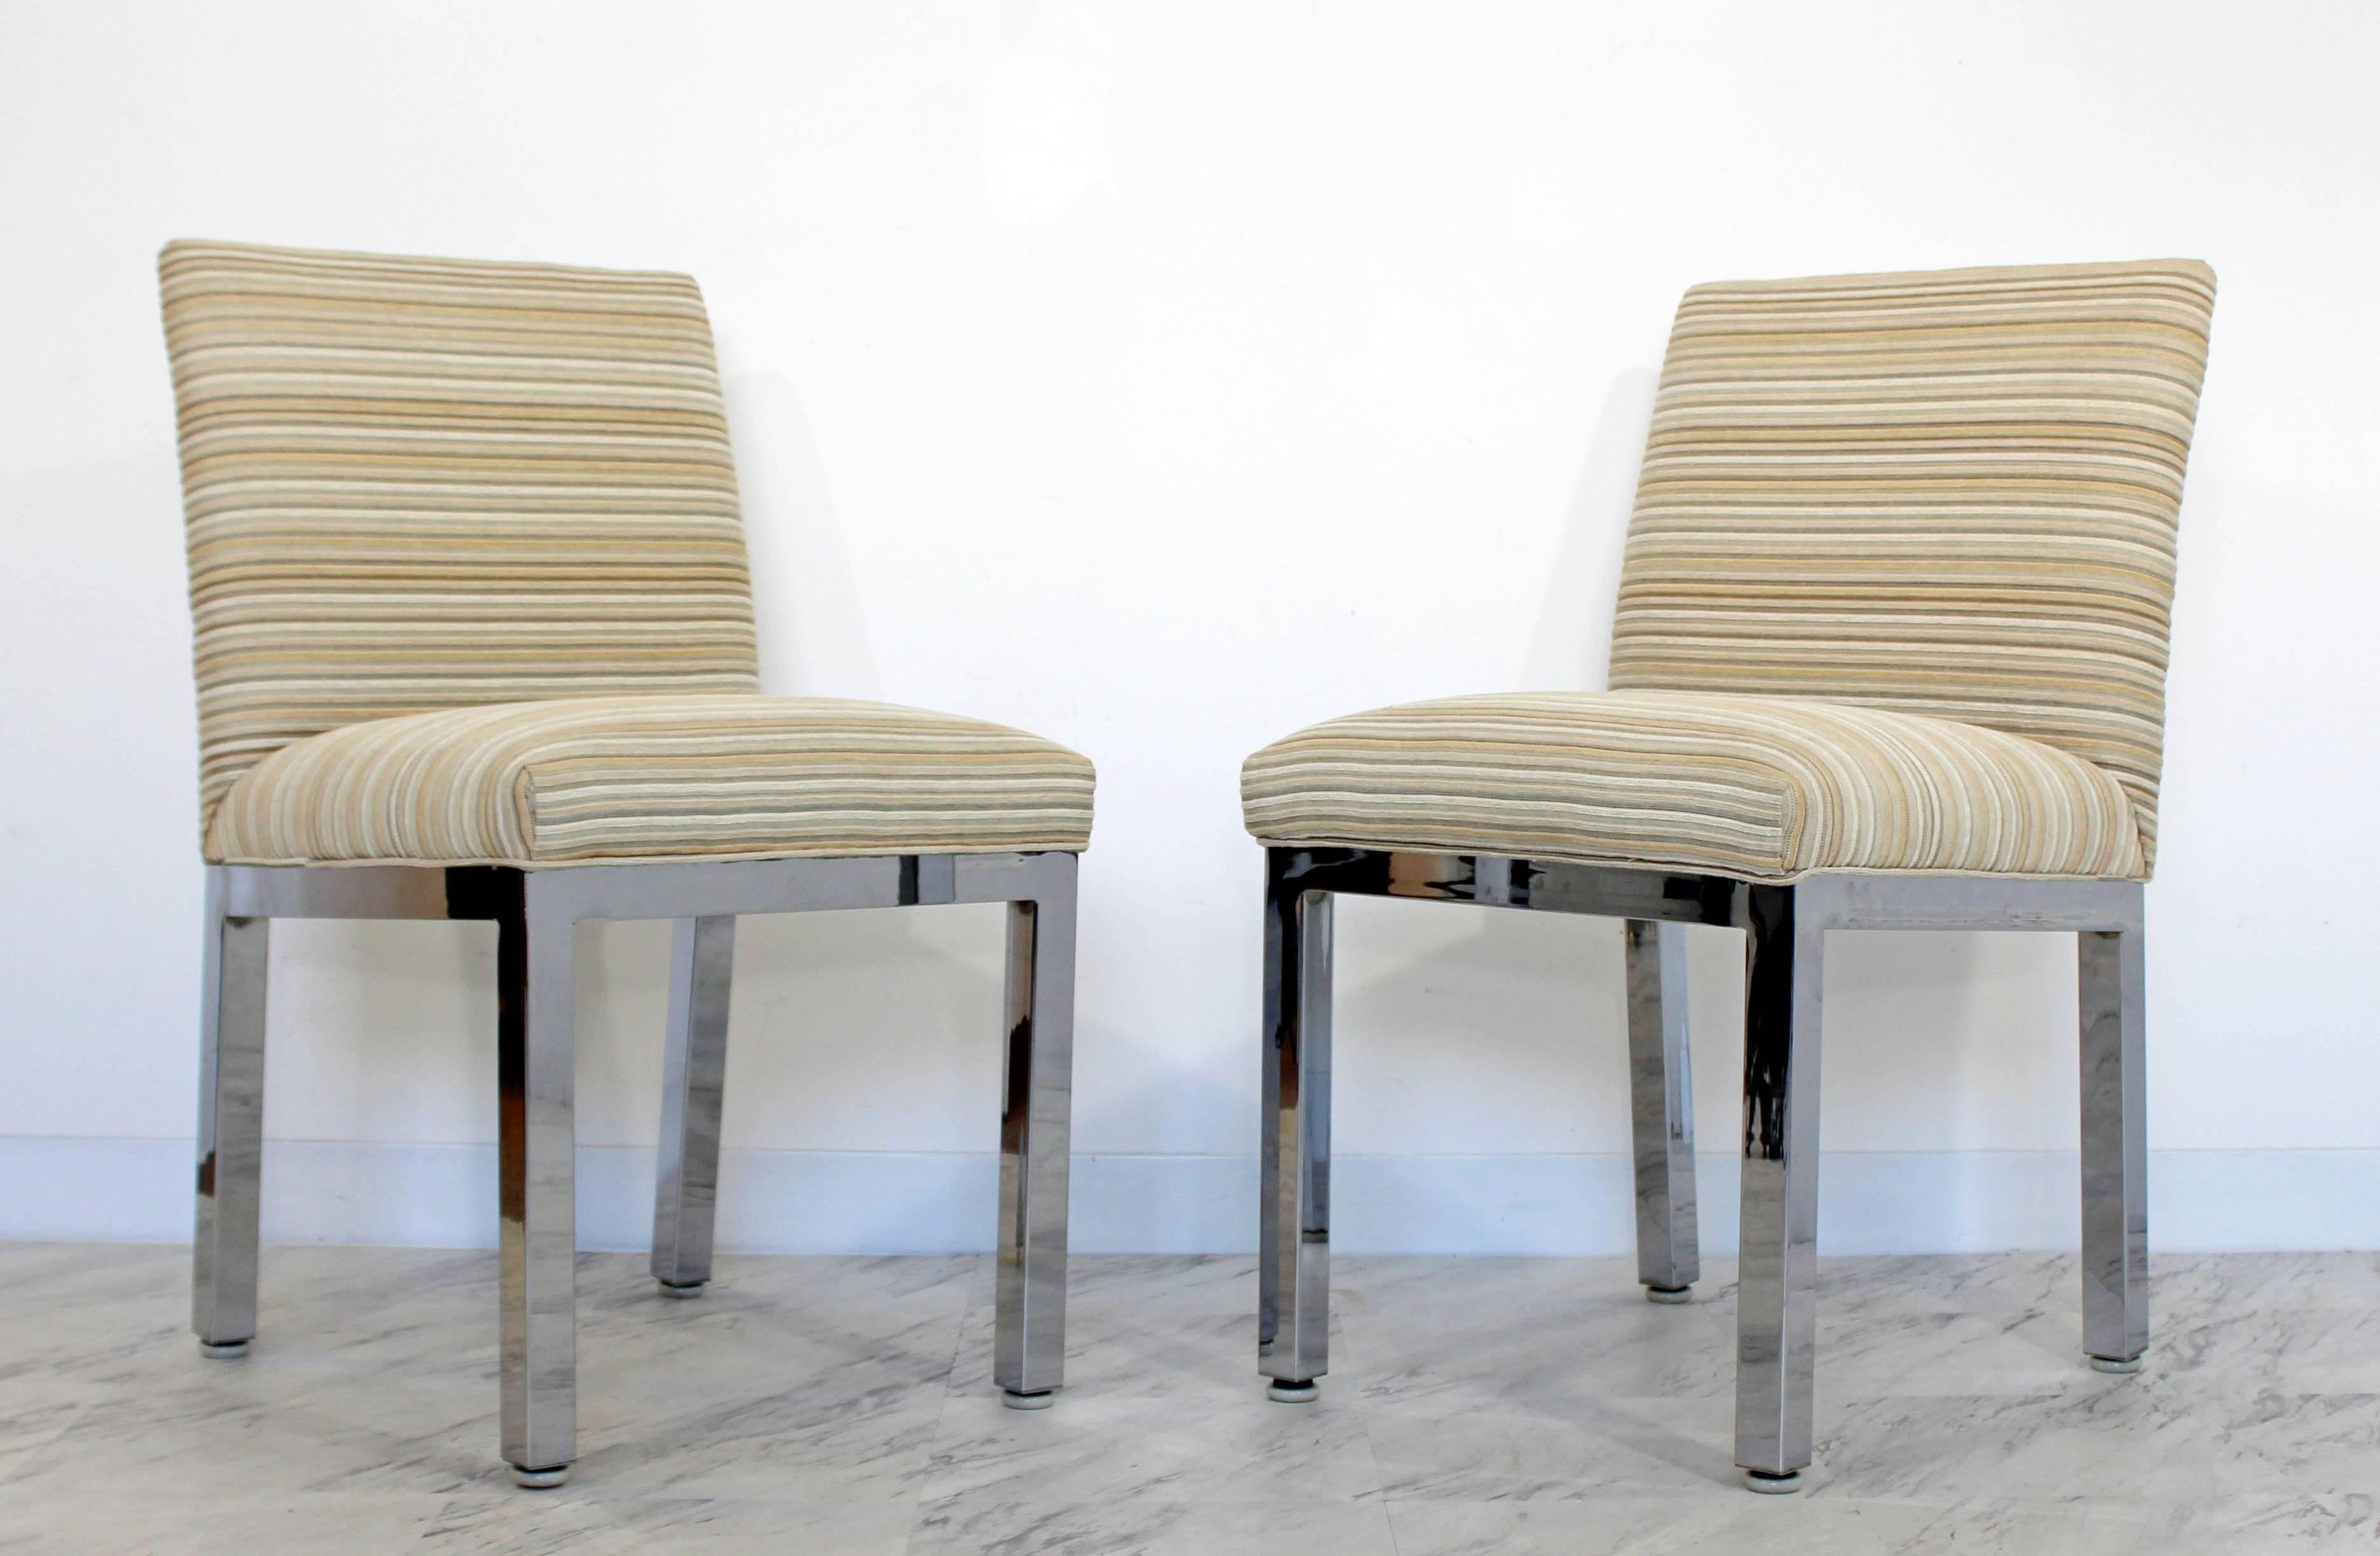 American Mid-Century Modern Set of Four Milo Baughman for DIA Chrome Dining Chairs, 1970s